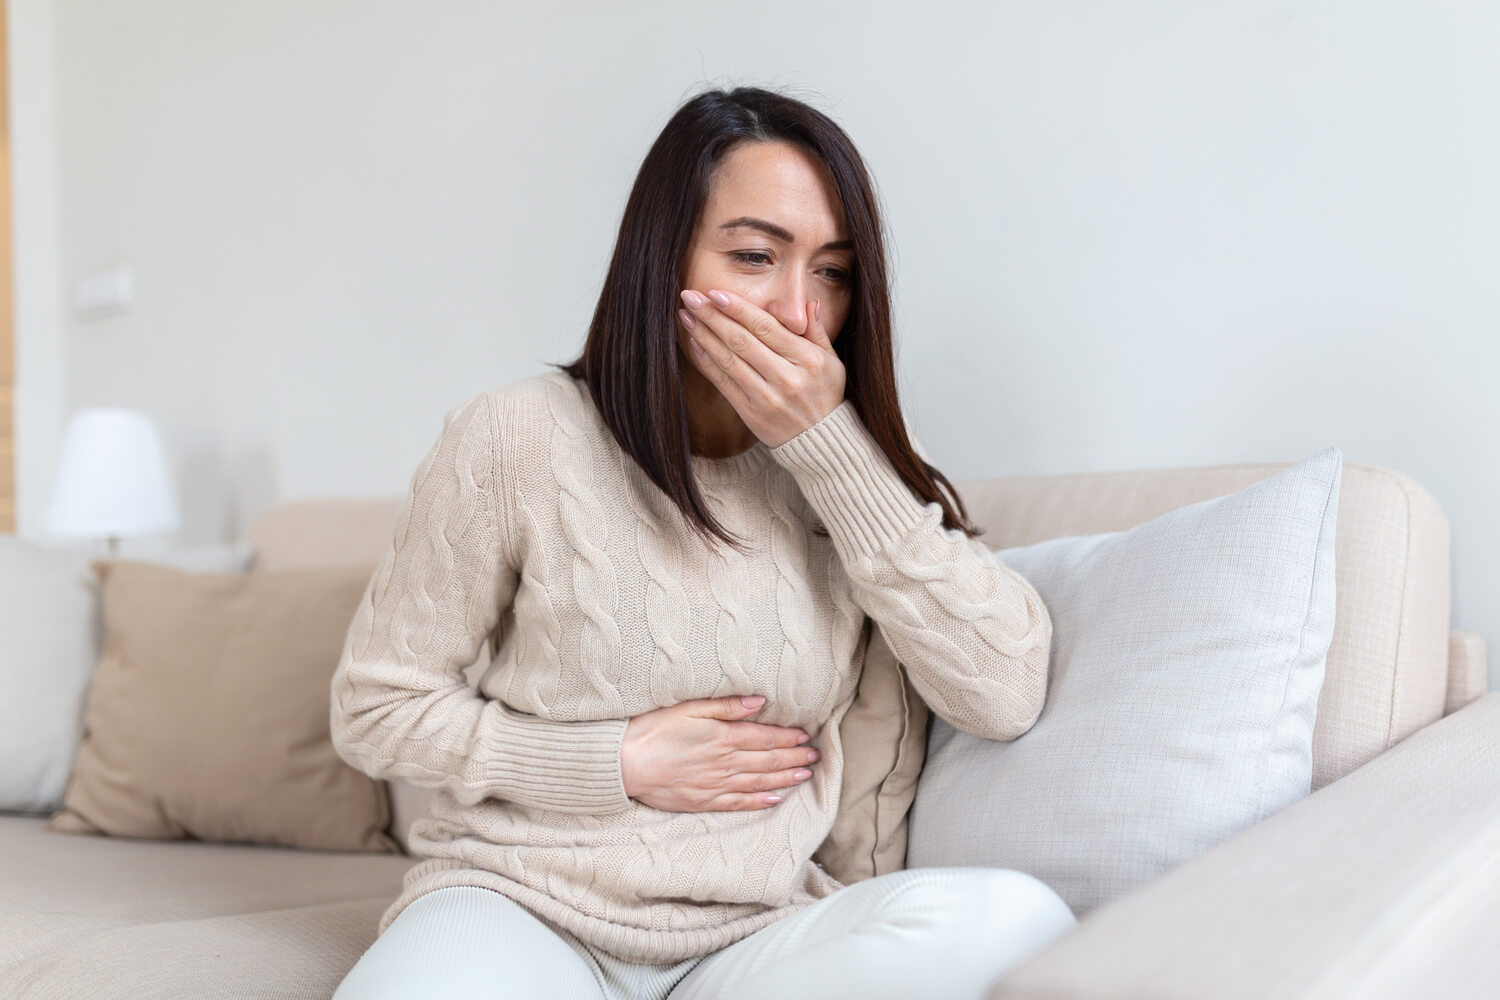 Treatments For Nausea And Vomiting In Pregnancy